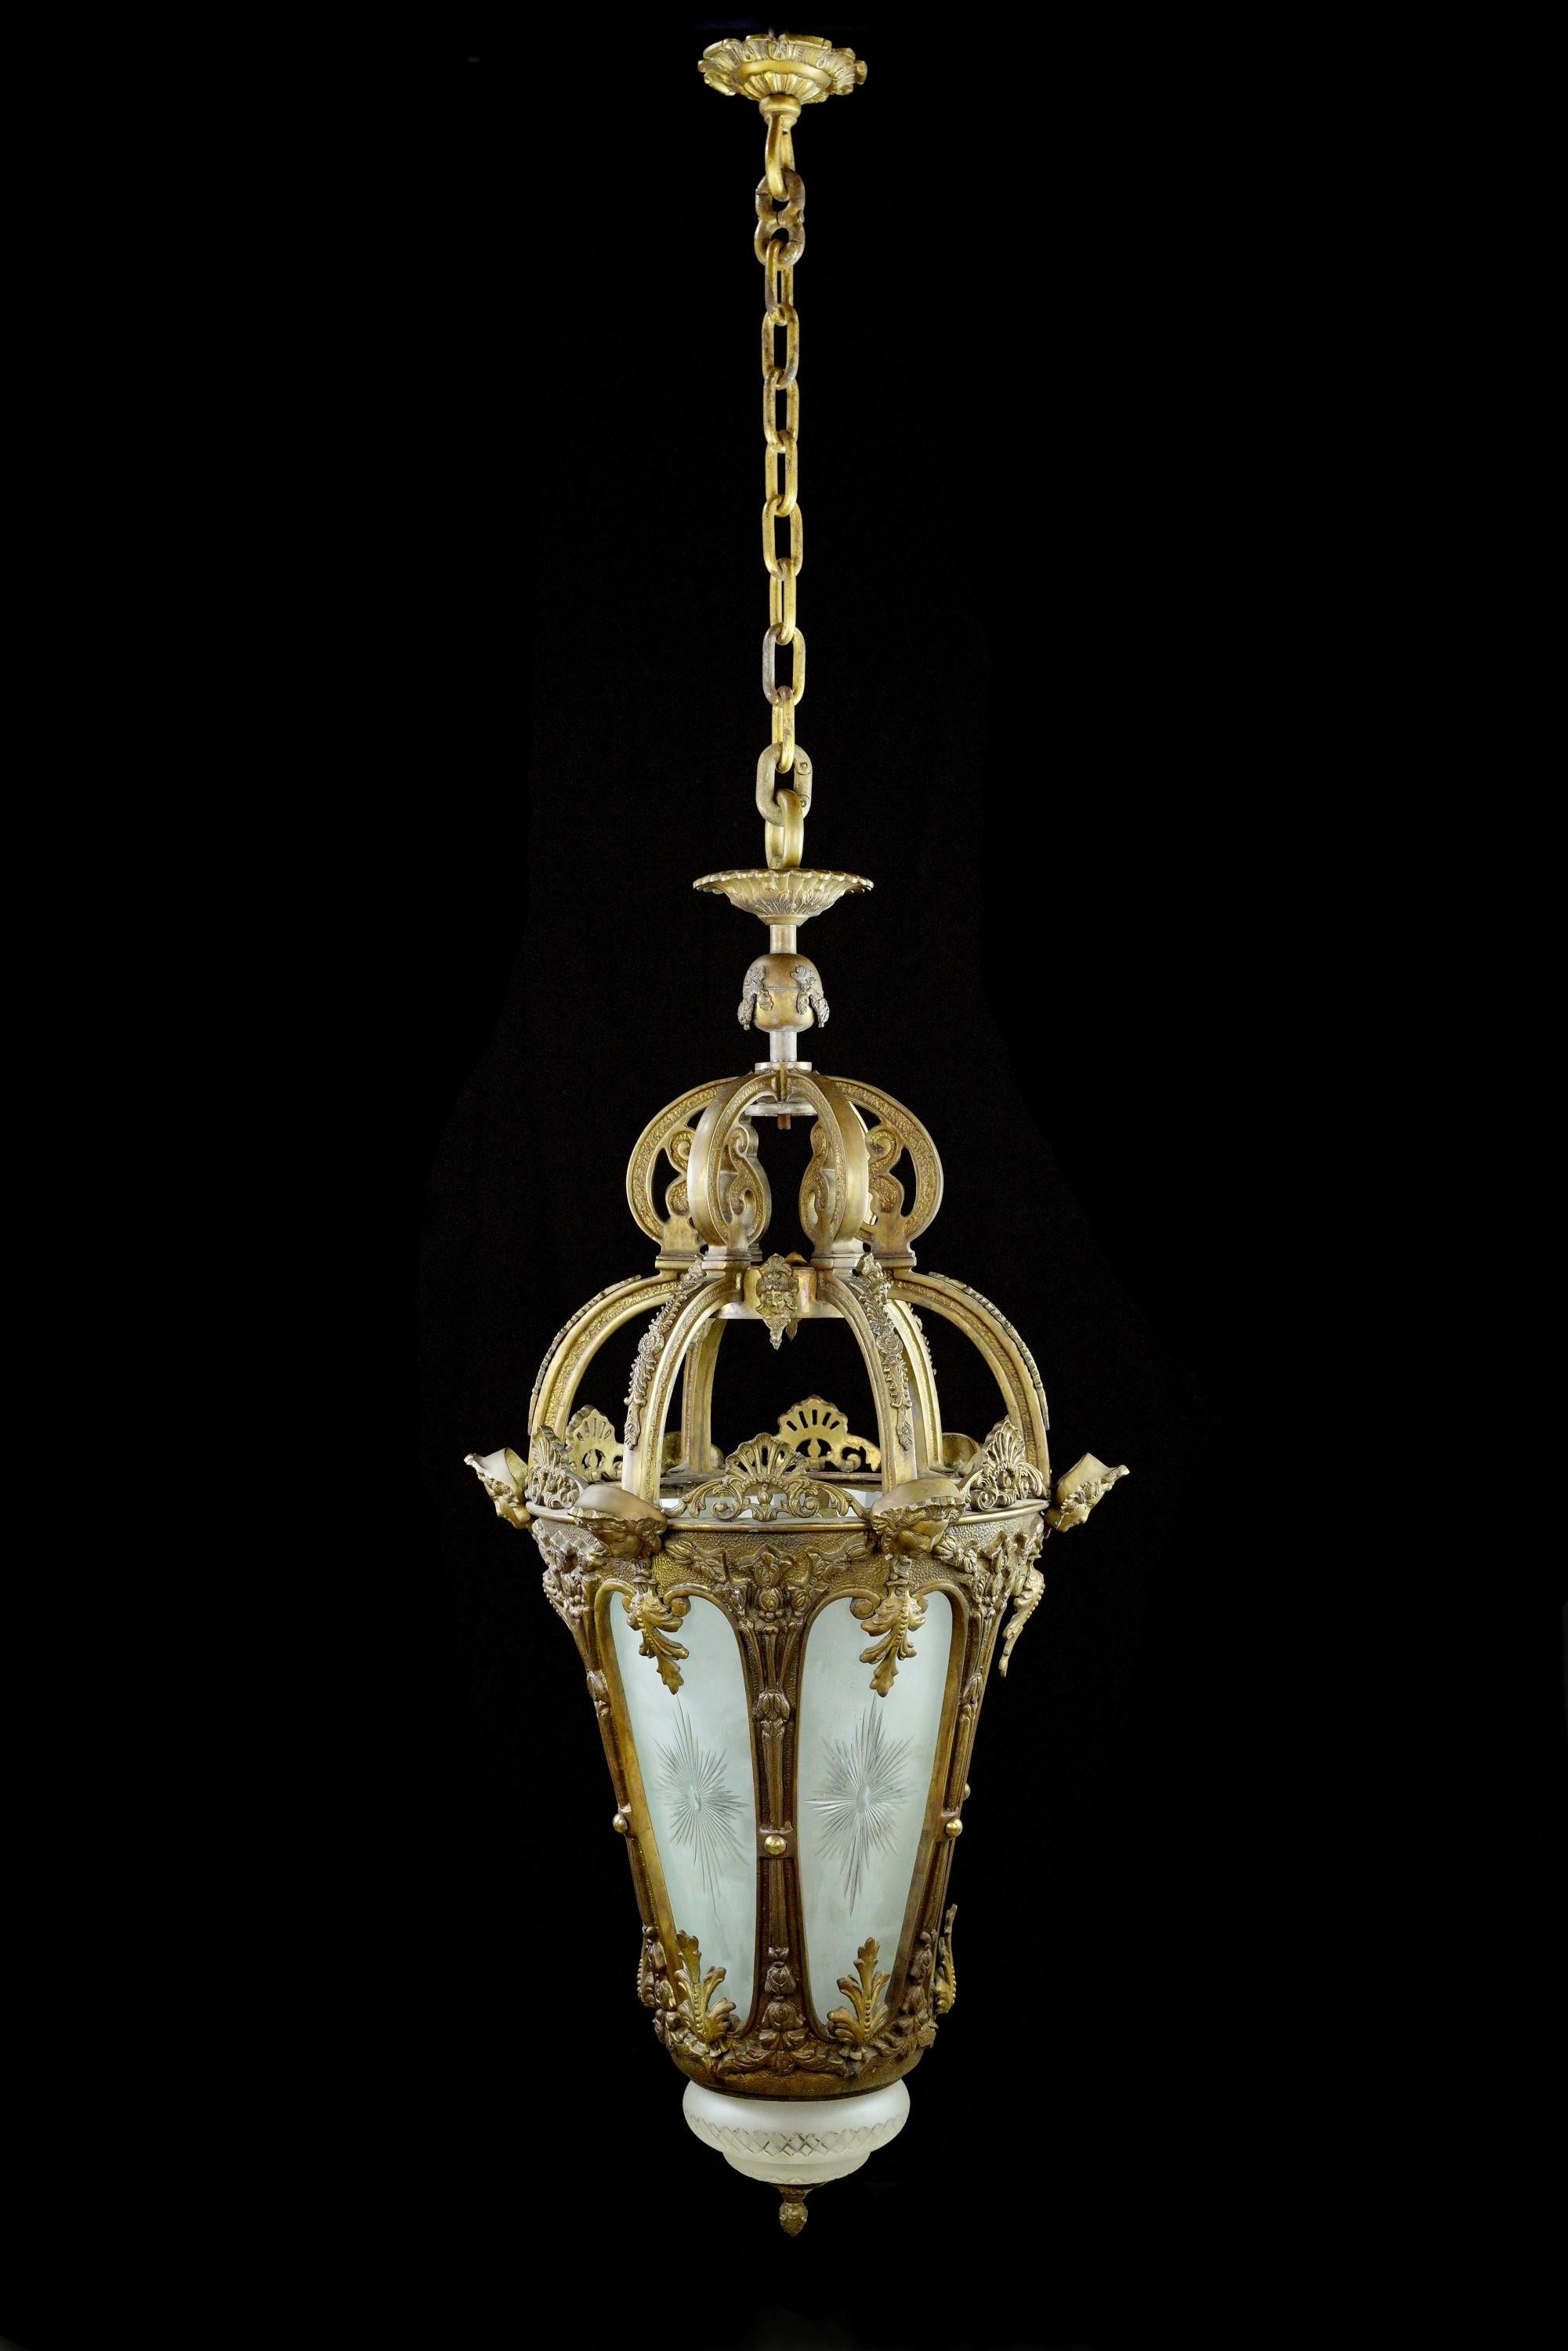 This French style highly ornate figural hanging lantern features intricate details in solid cast bronze. Its frosted and etched glass panels emit a soft and inviting glow, adding a touch of opulence to any space. Cleaned and restored. A true